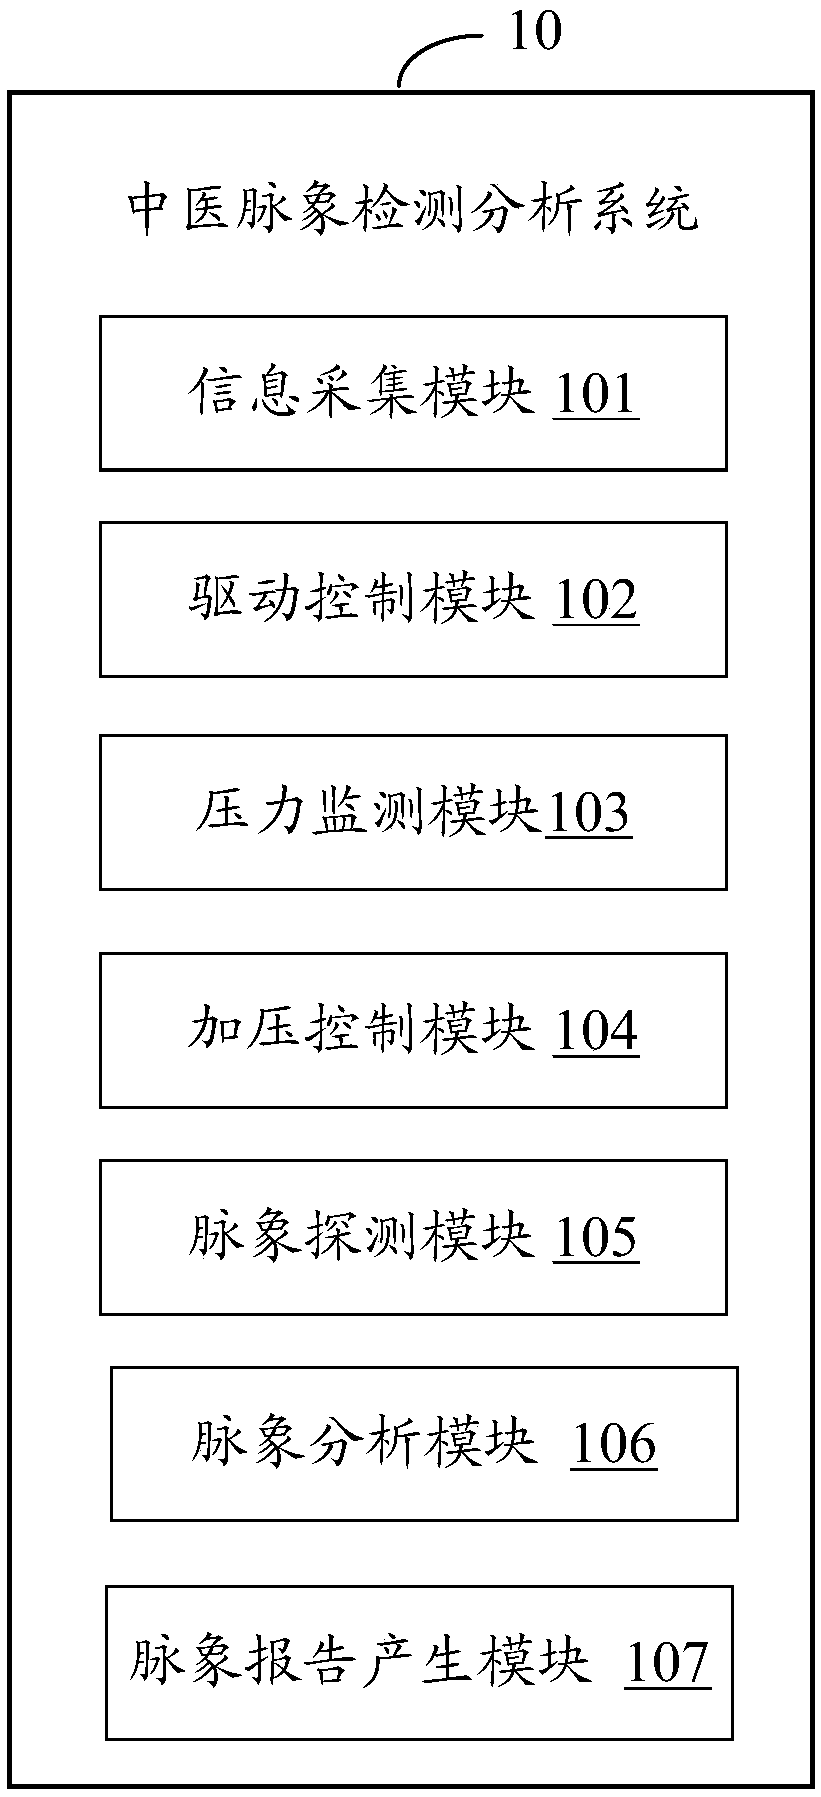 Traditional-Chinese-medicine pulse detection and analysis system, and traditional-Chinese-medicine pulse detection and analysis method